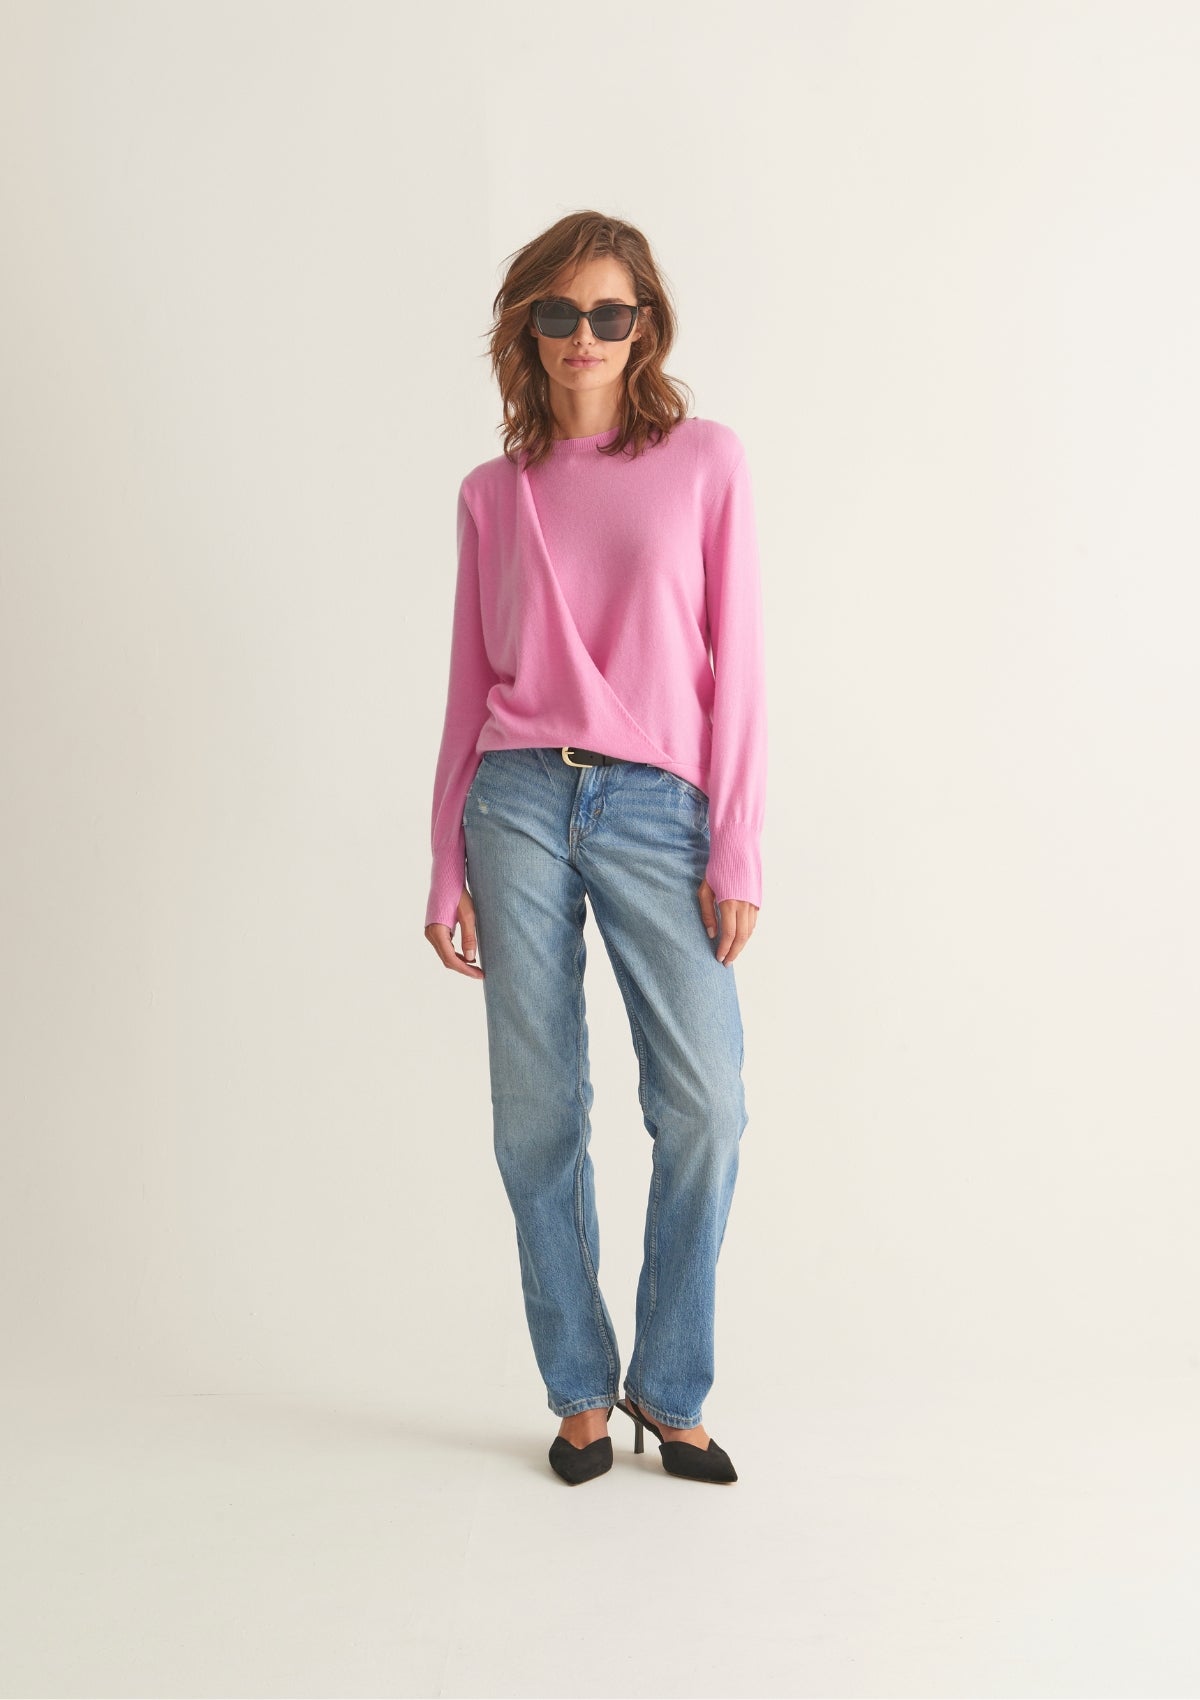 Ruched Cashmere Sweatshirt in Peony Pink